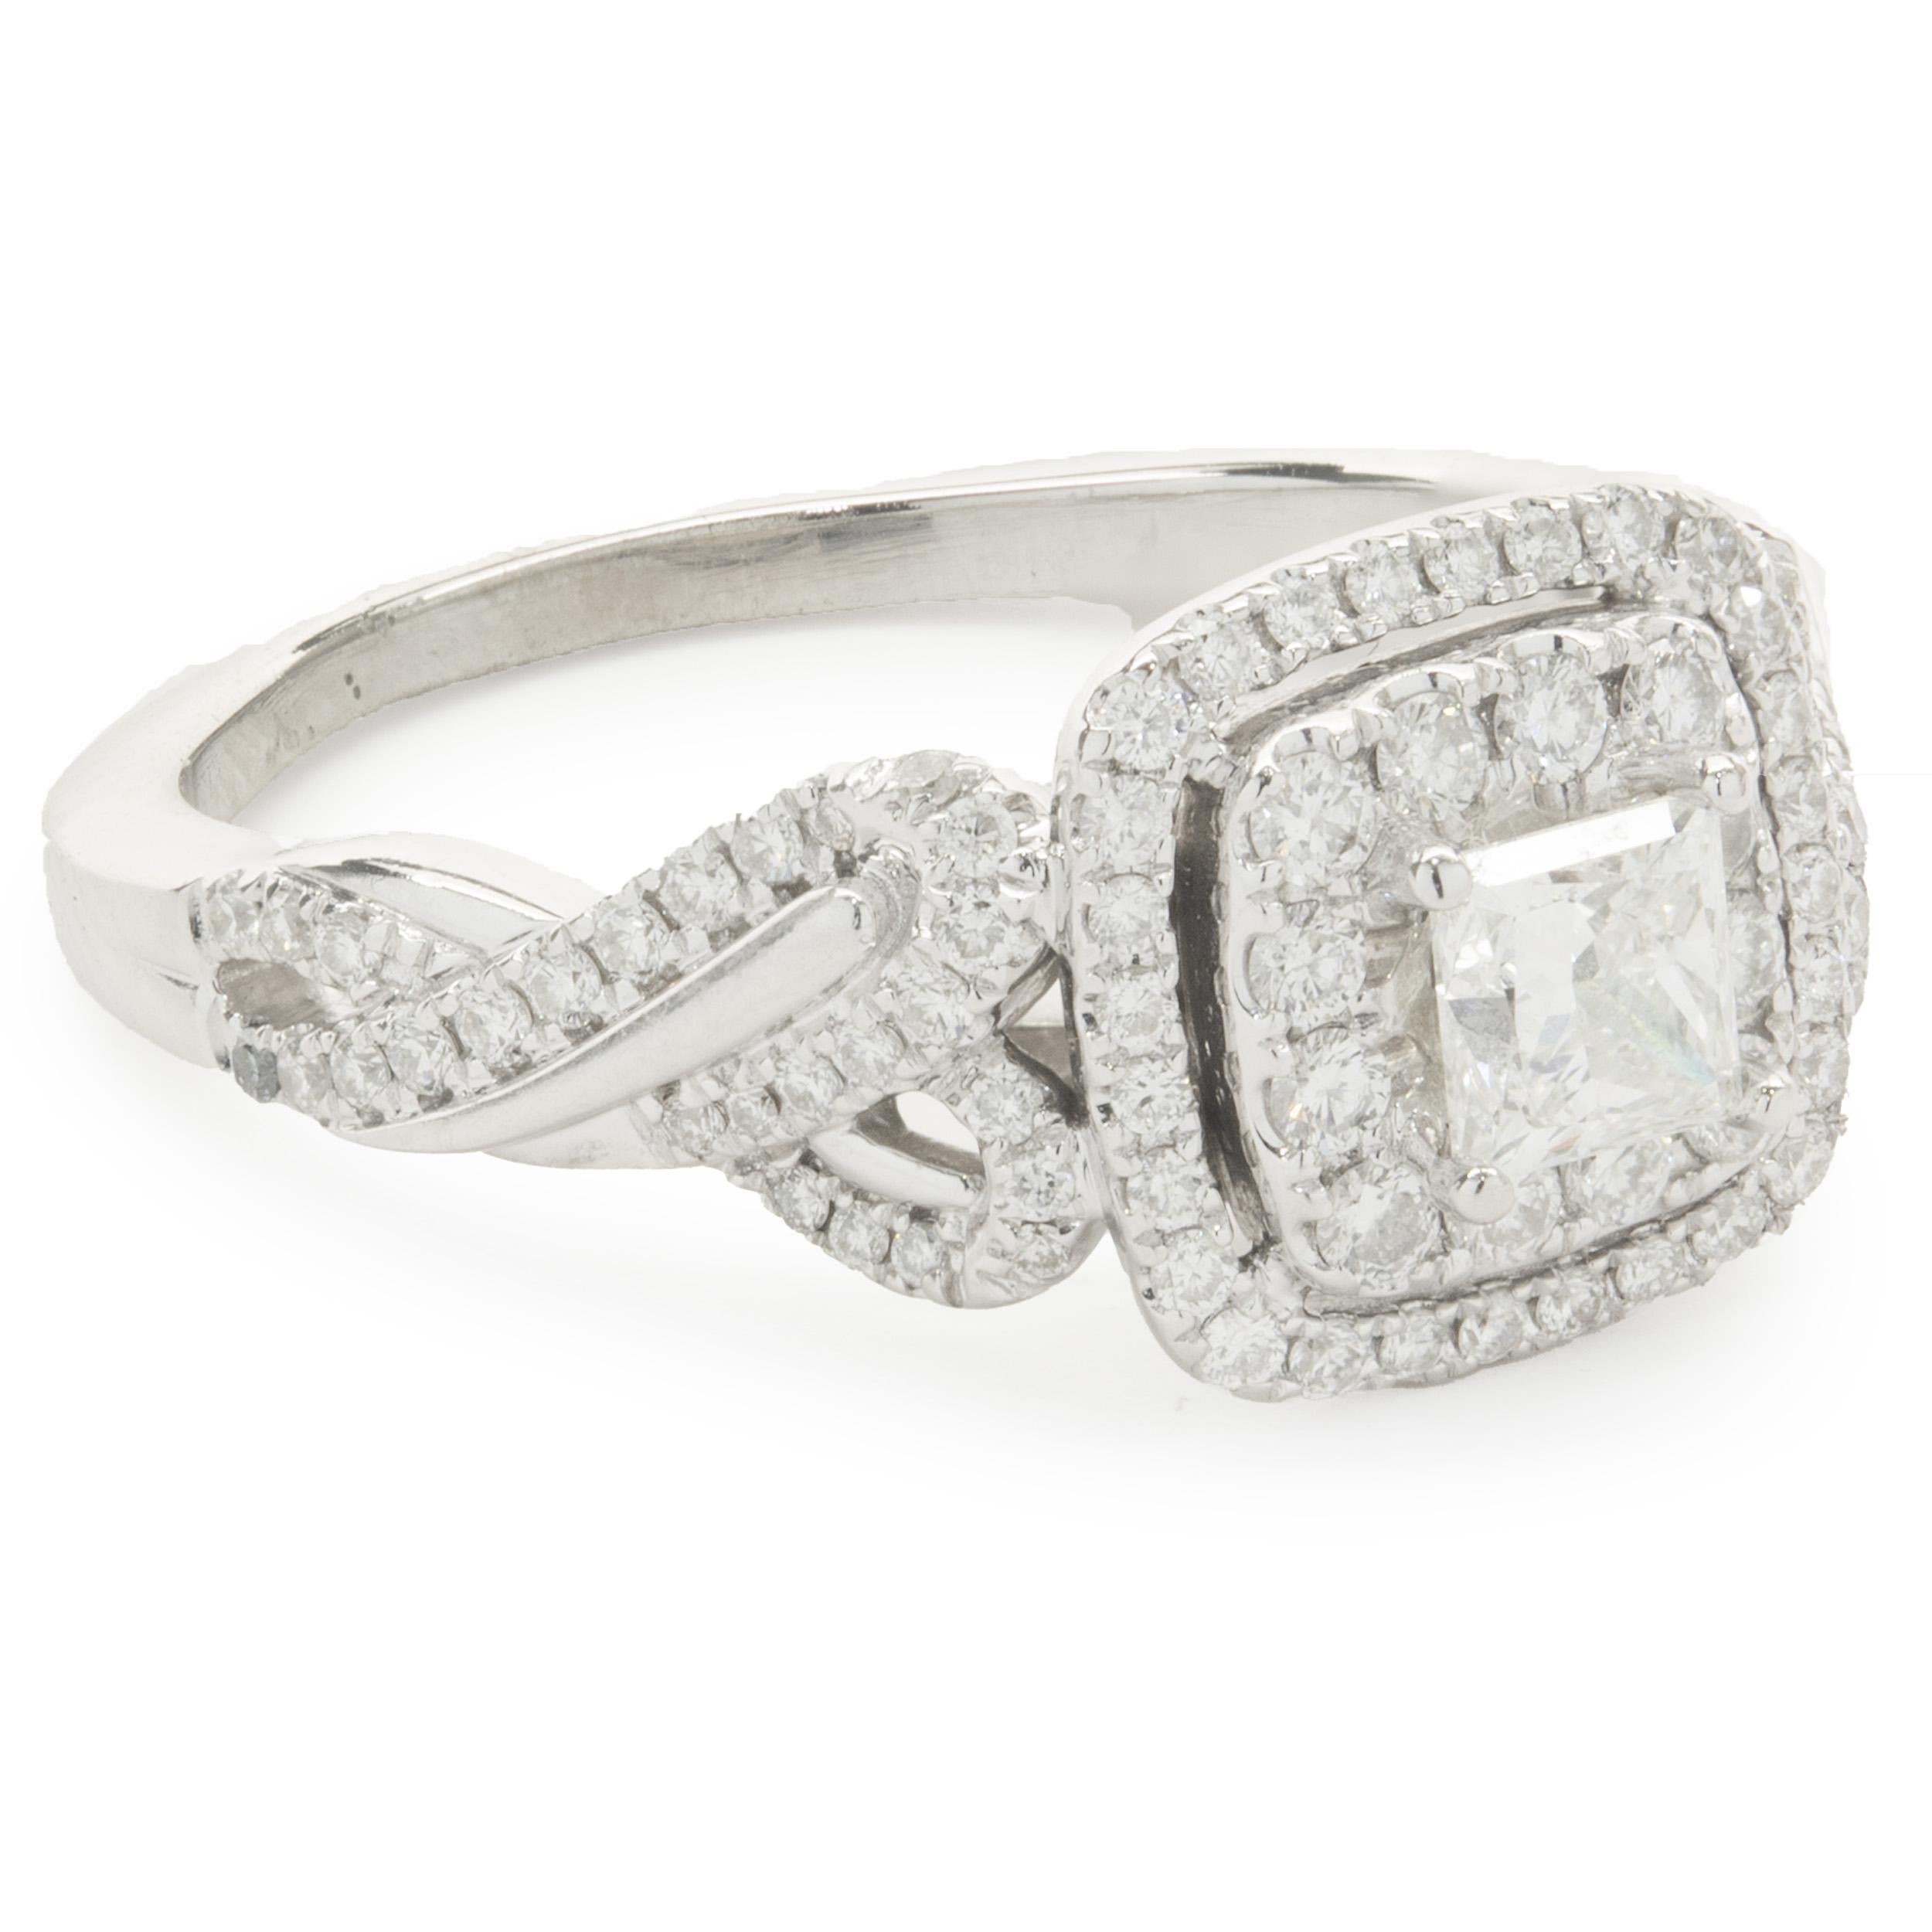 Designer: Vera Wang
Material: 14K white gold
Diamond: 1 princess cut = 0.40ct
Color: G
Clarity: SI1 
Diamond: round brilliant cut = 2.99cttw
Color: G
Clarity: VS2
Ring Size: 9.5 (please allow two additional shipping days for sizing